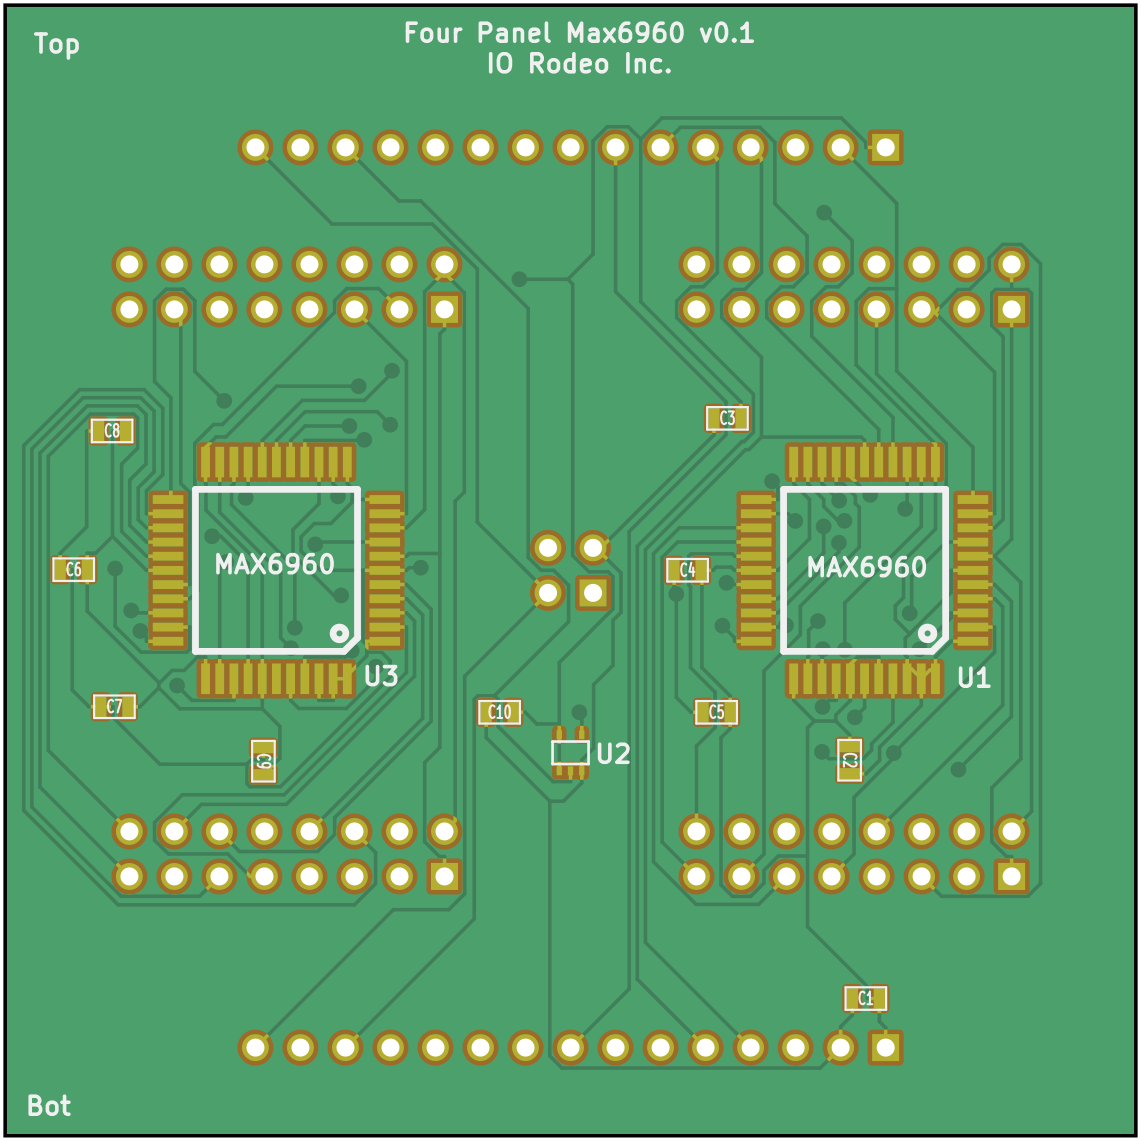 Rendering of the 64mm driver version 0.1 using a MAX6960